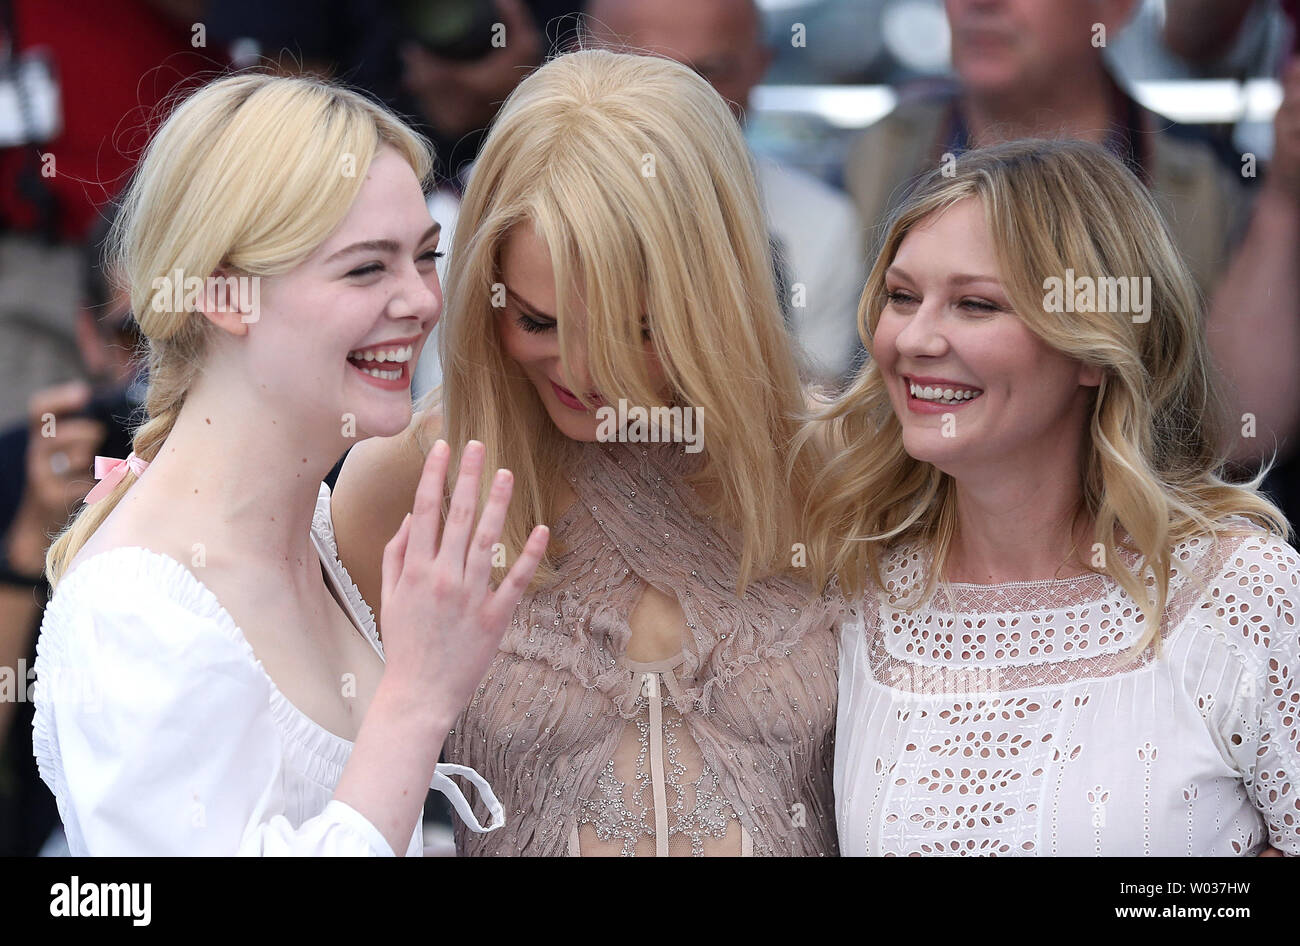 Elle Fanning (L), Nicole Kidman (C) and Kirsten Dunst arrive at a photocall  for the film "The Beguiled" during the 70th annual Cannes International  Film Festival in Cannes, France on May 24,